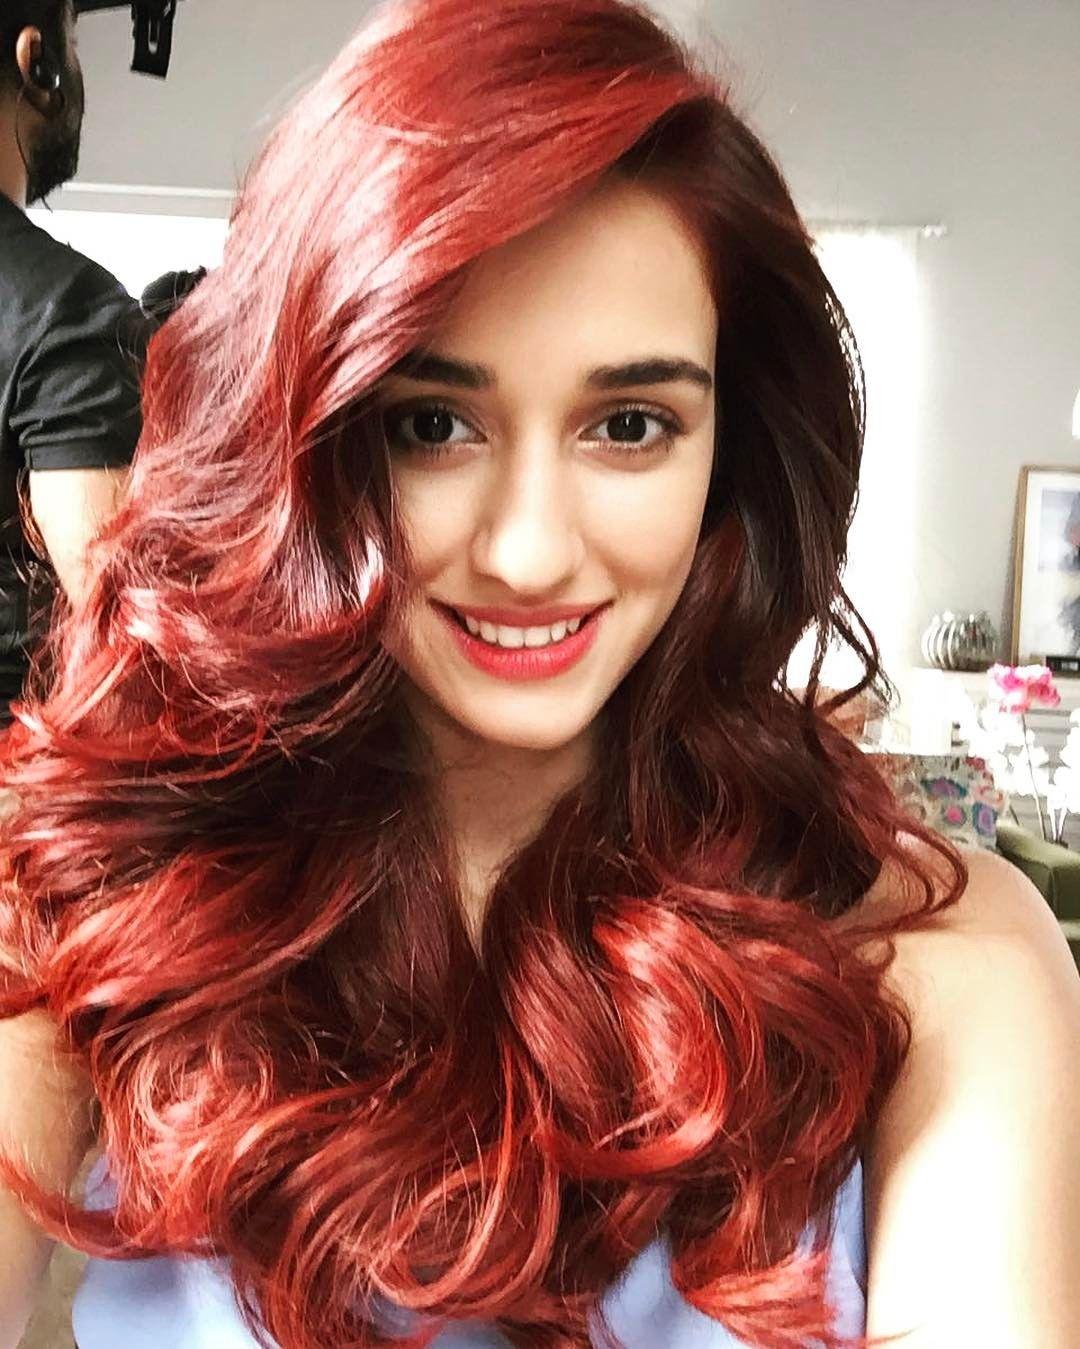 Disha Patani Unseen Images Will Give You A sweet Heart Pain